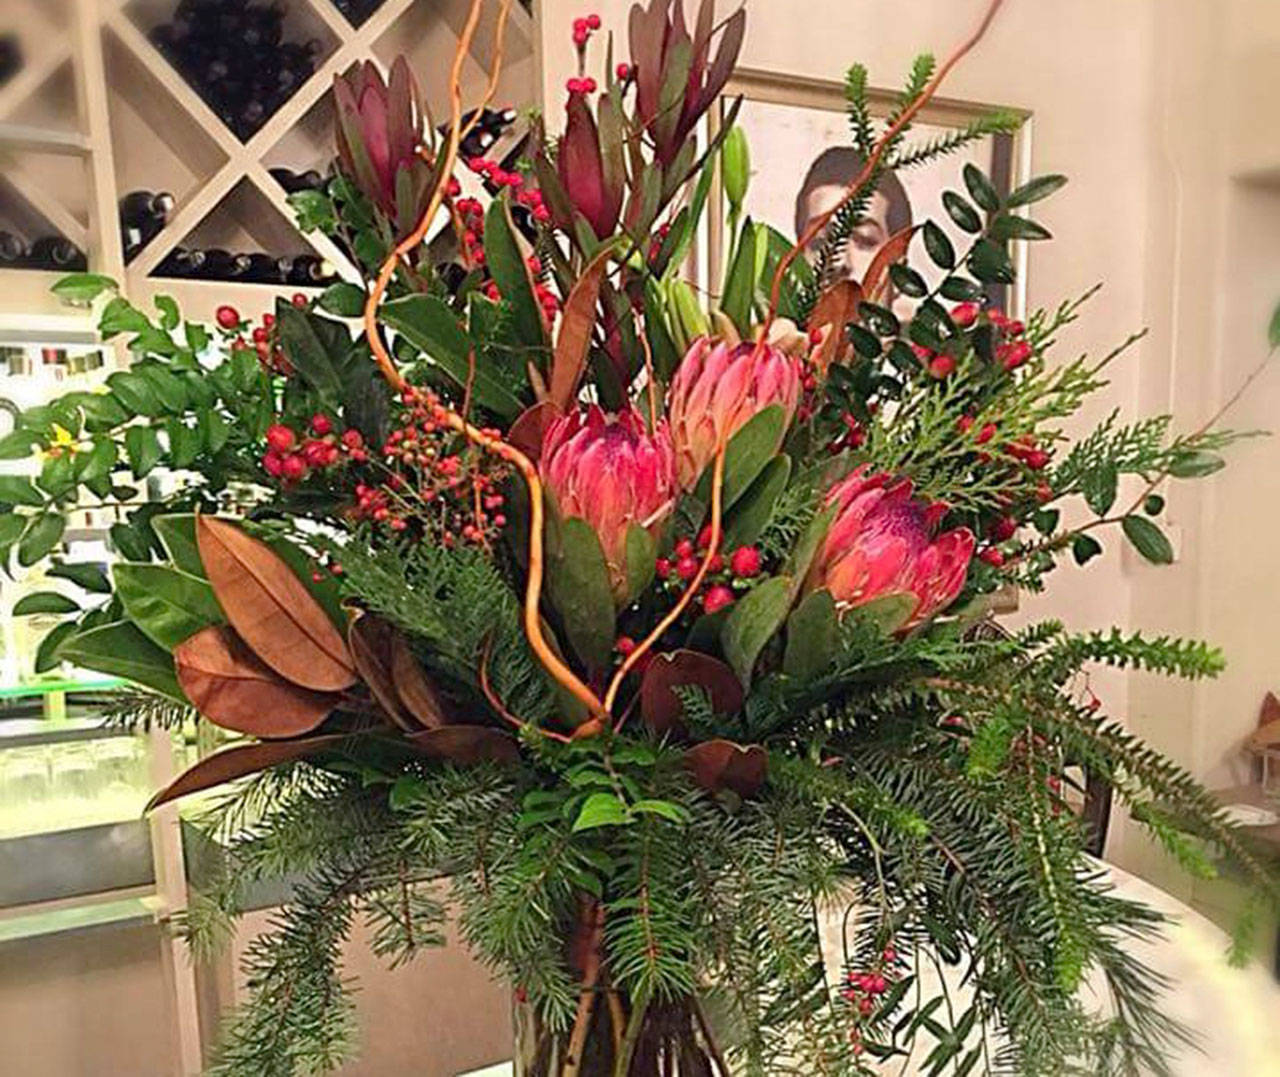 One of the First Friday art walk events will feature floral designer Jessika Mazure of House of Posie on Mercer Island. Photo courtesy of Ginny Clarke